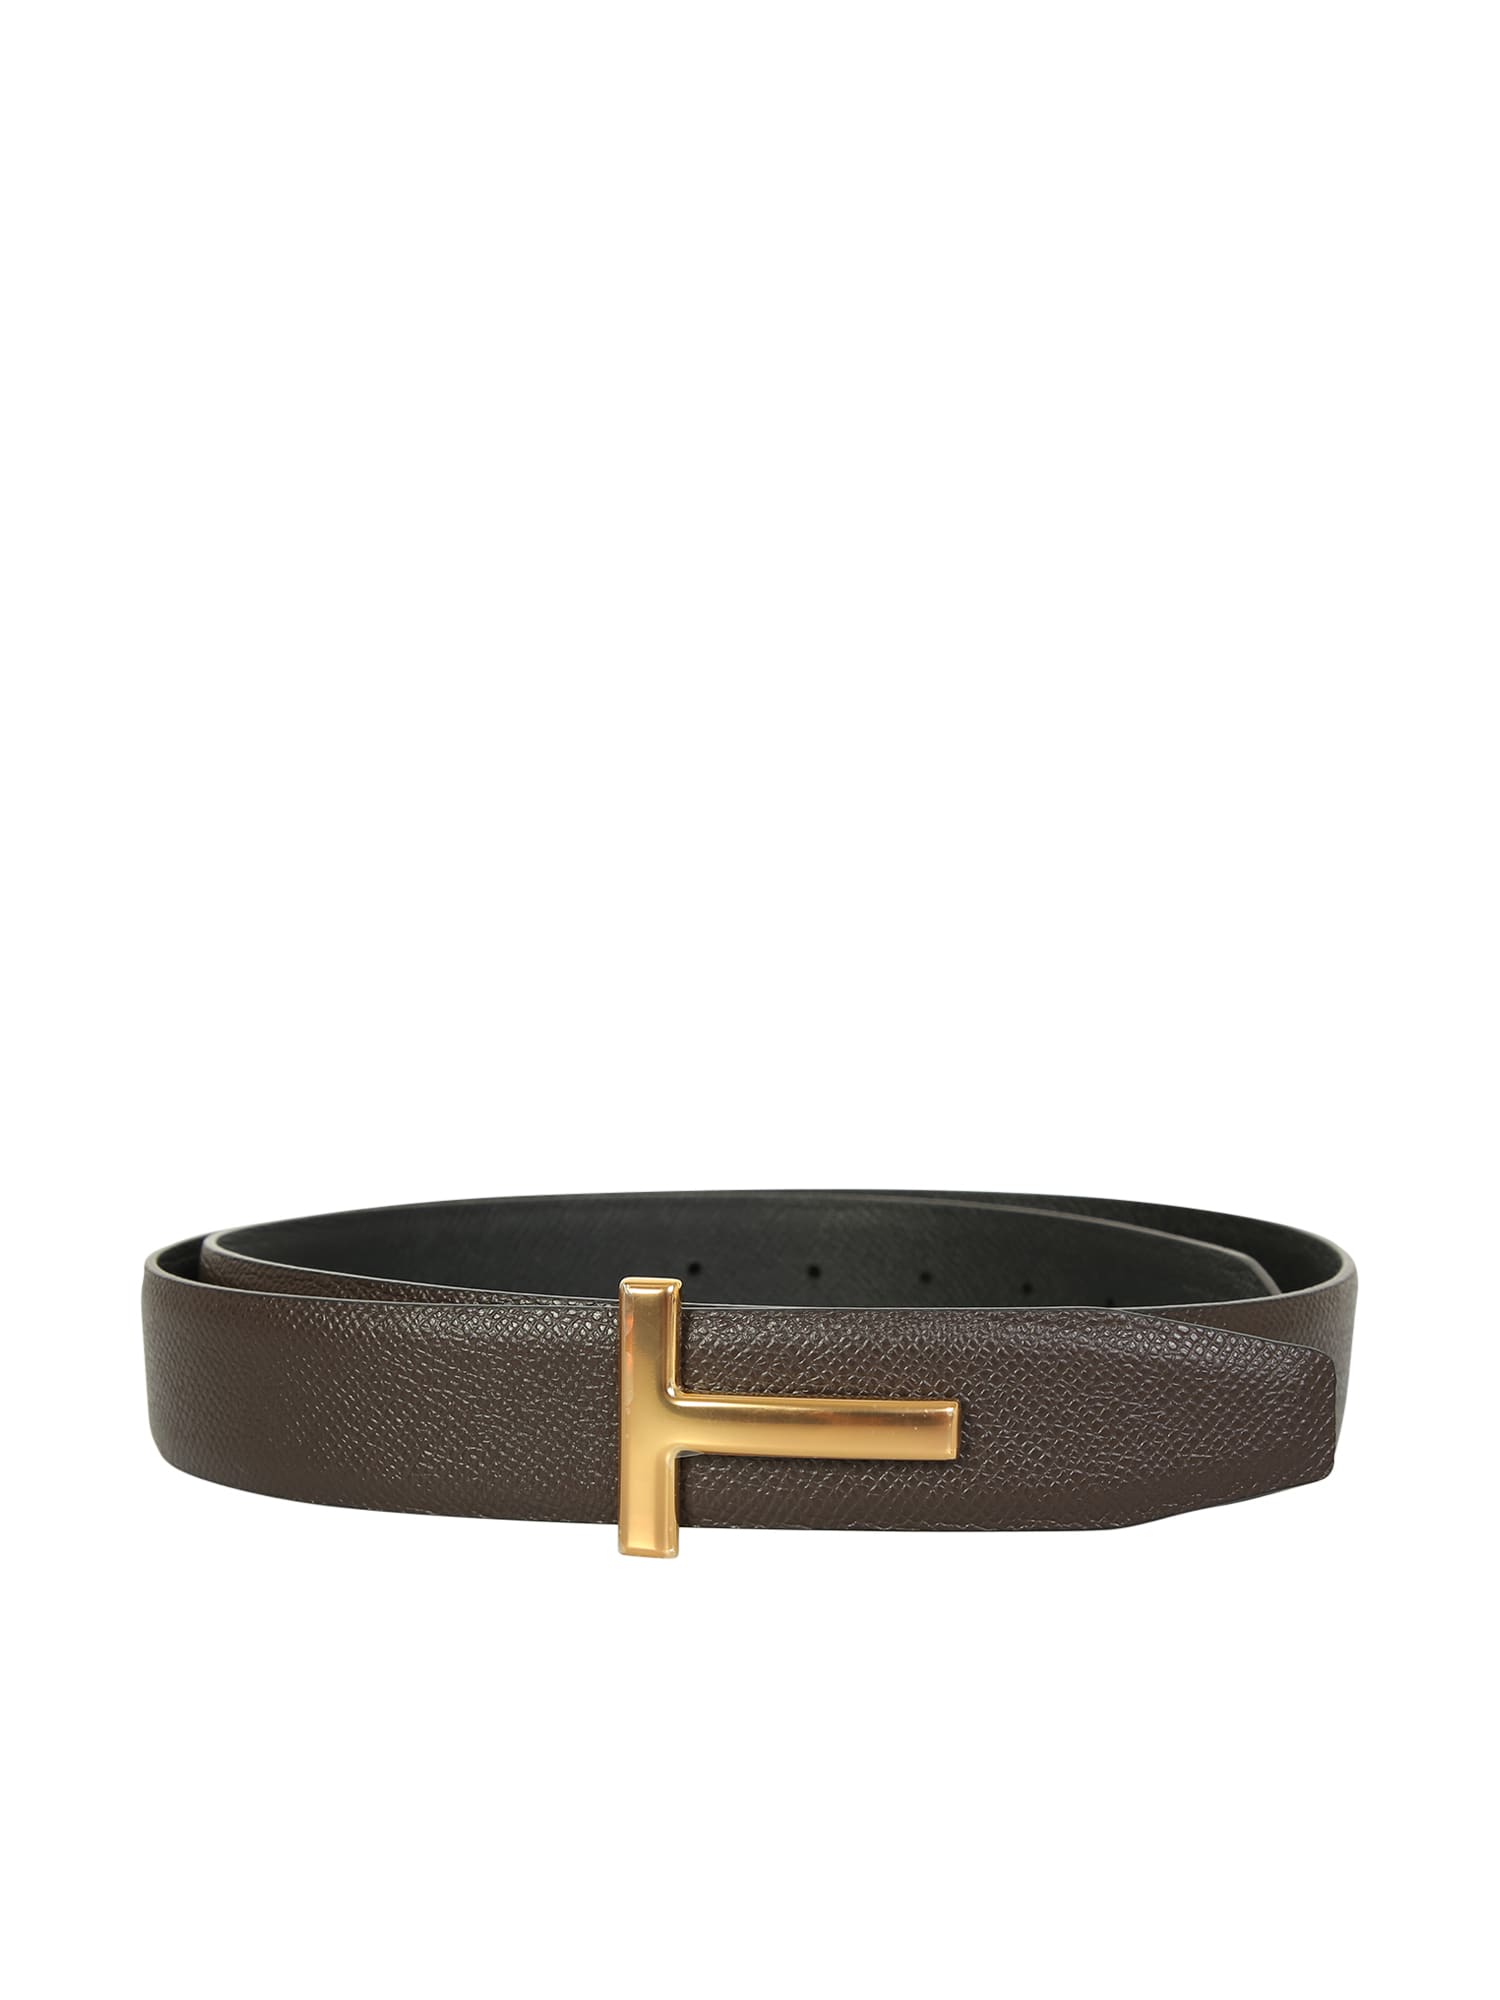 Tom Ford Black Leather Belt With A Reversible Design (30)